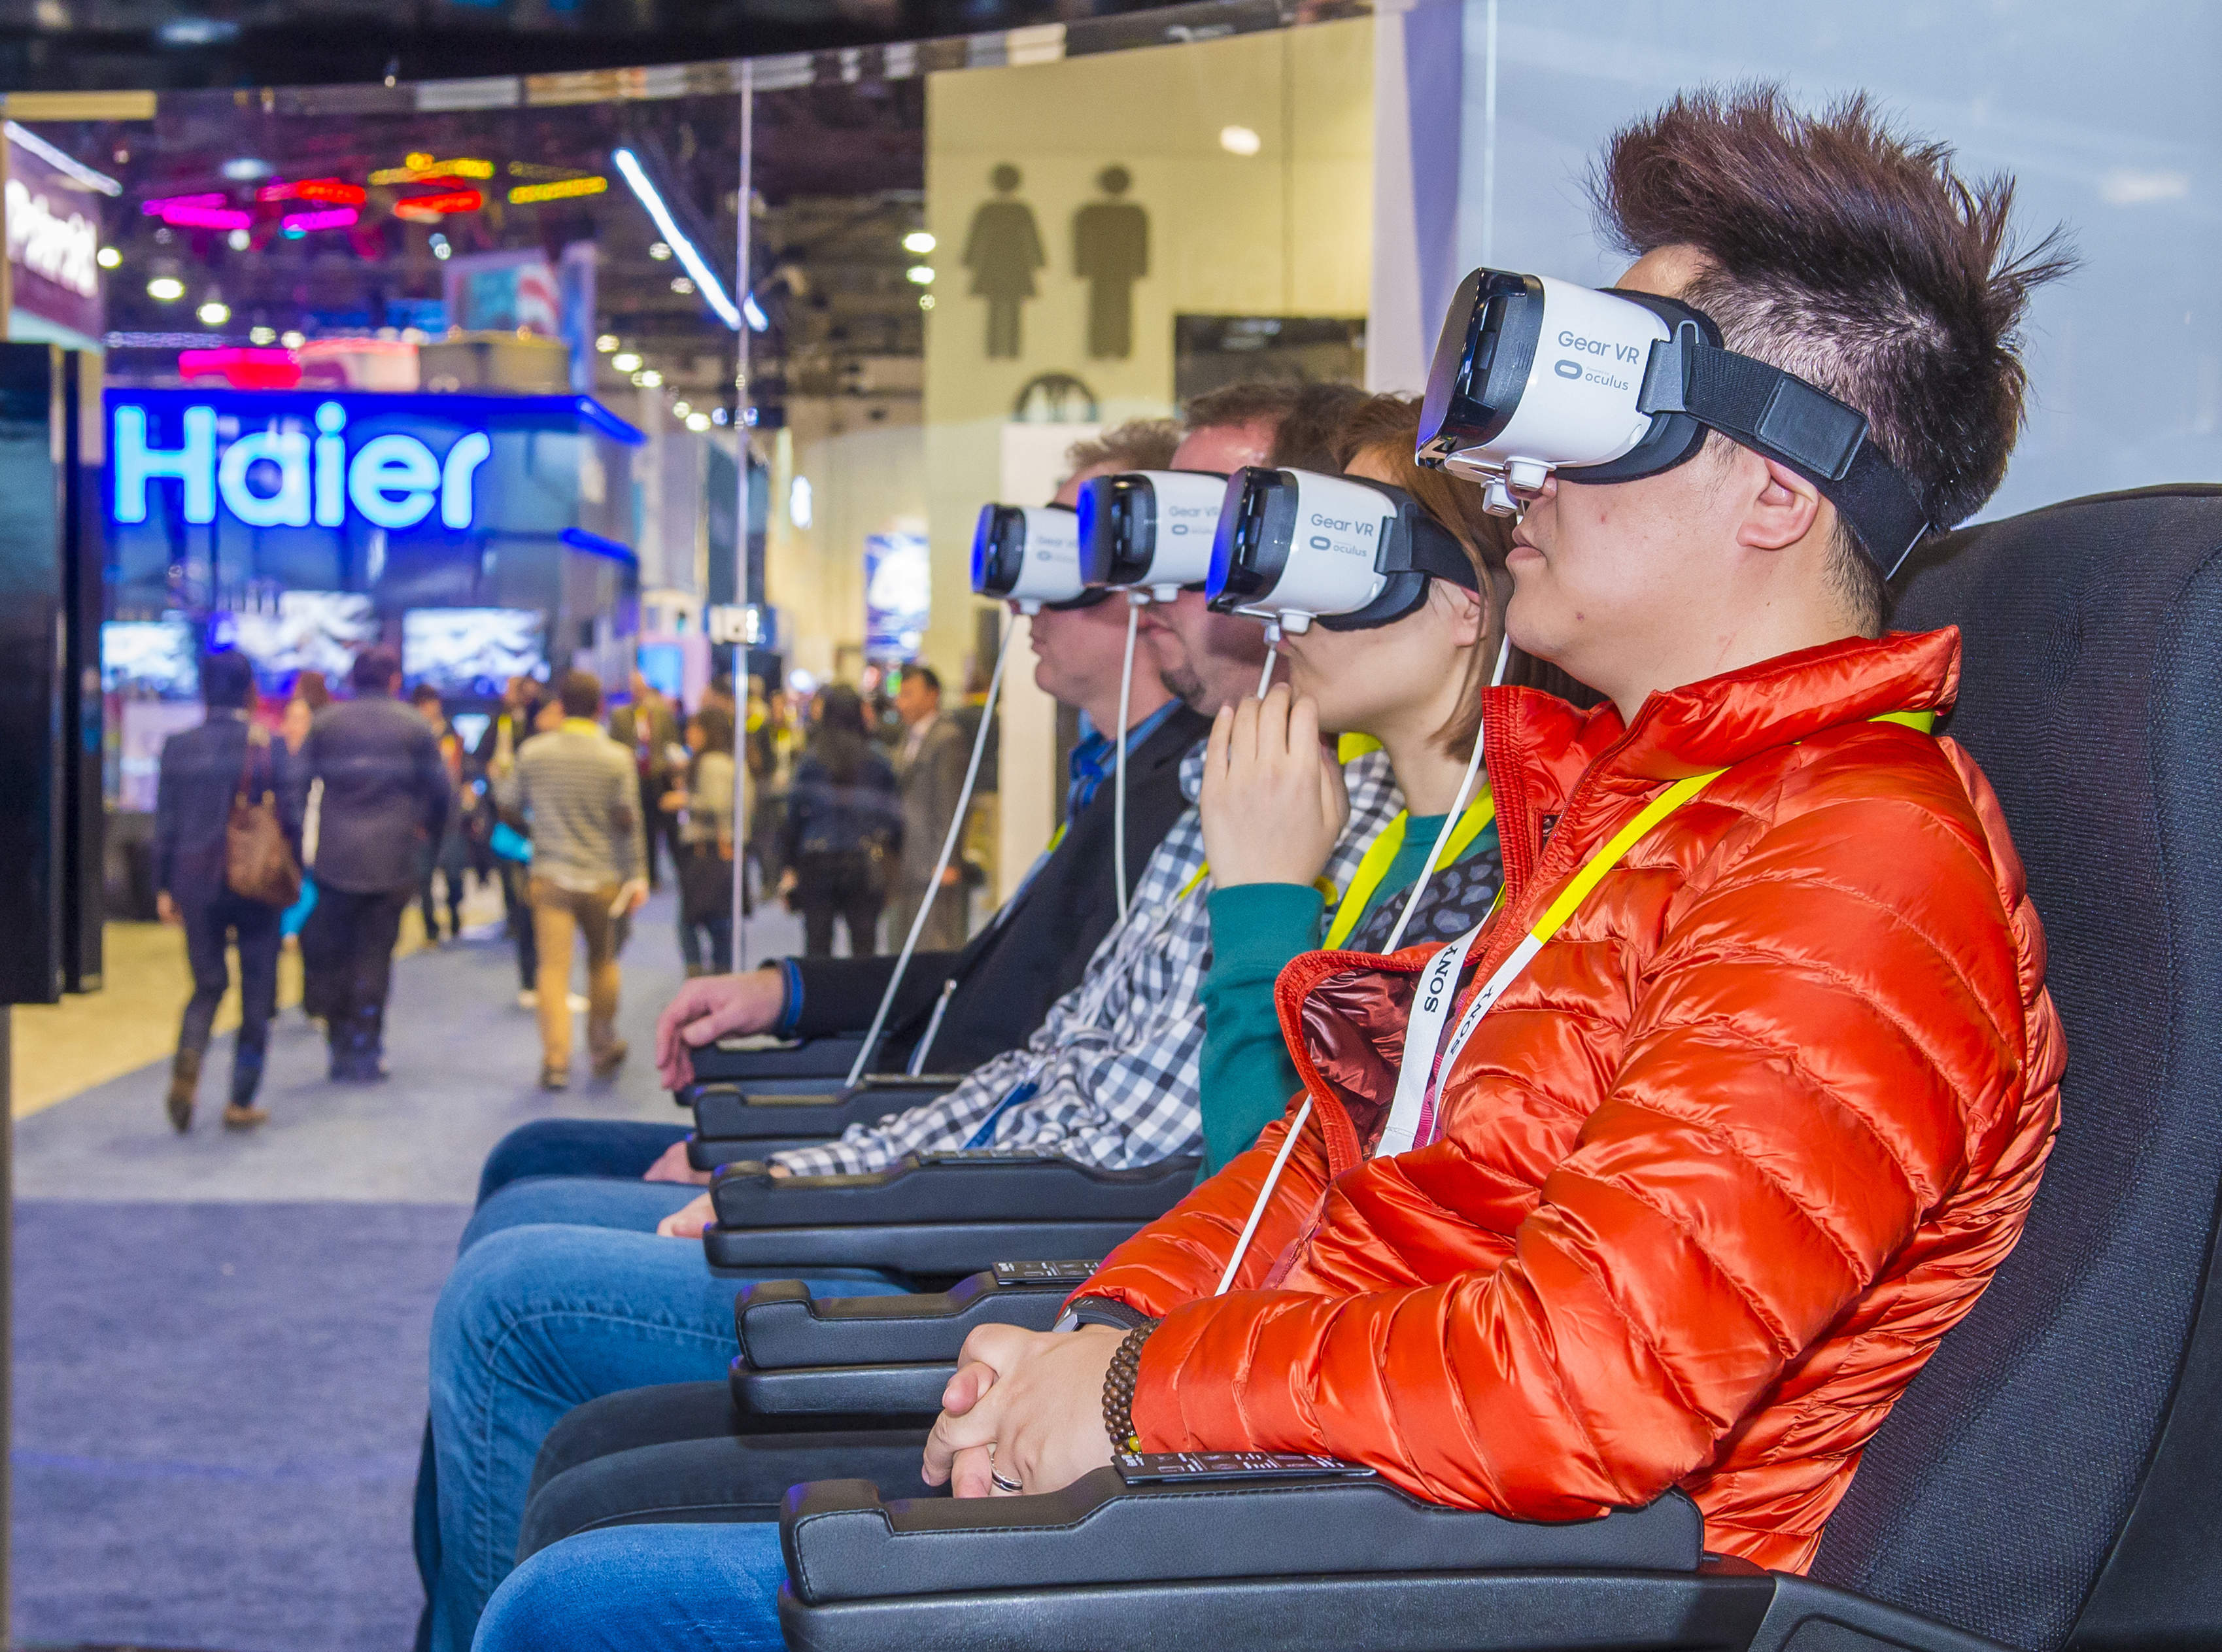 Gaming at CES Las Vegas 2018: what to expect from the video game world